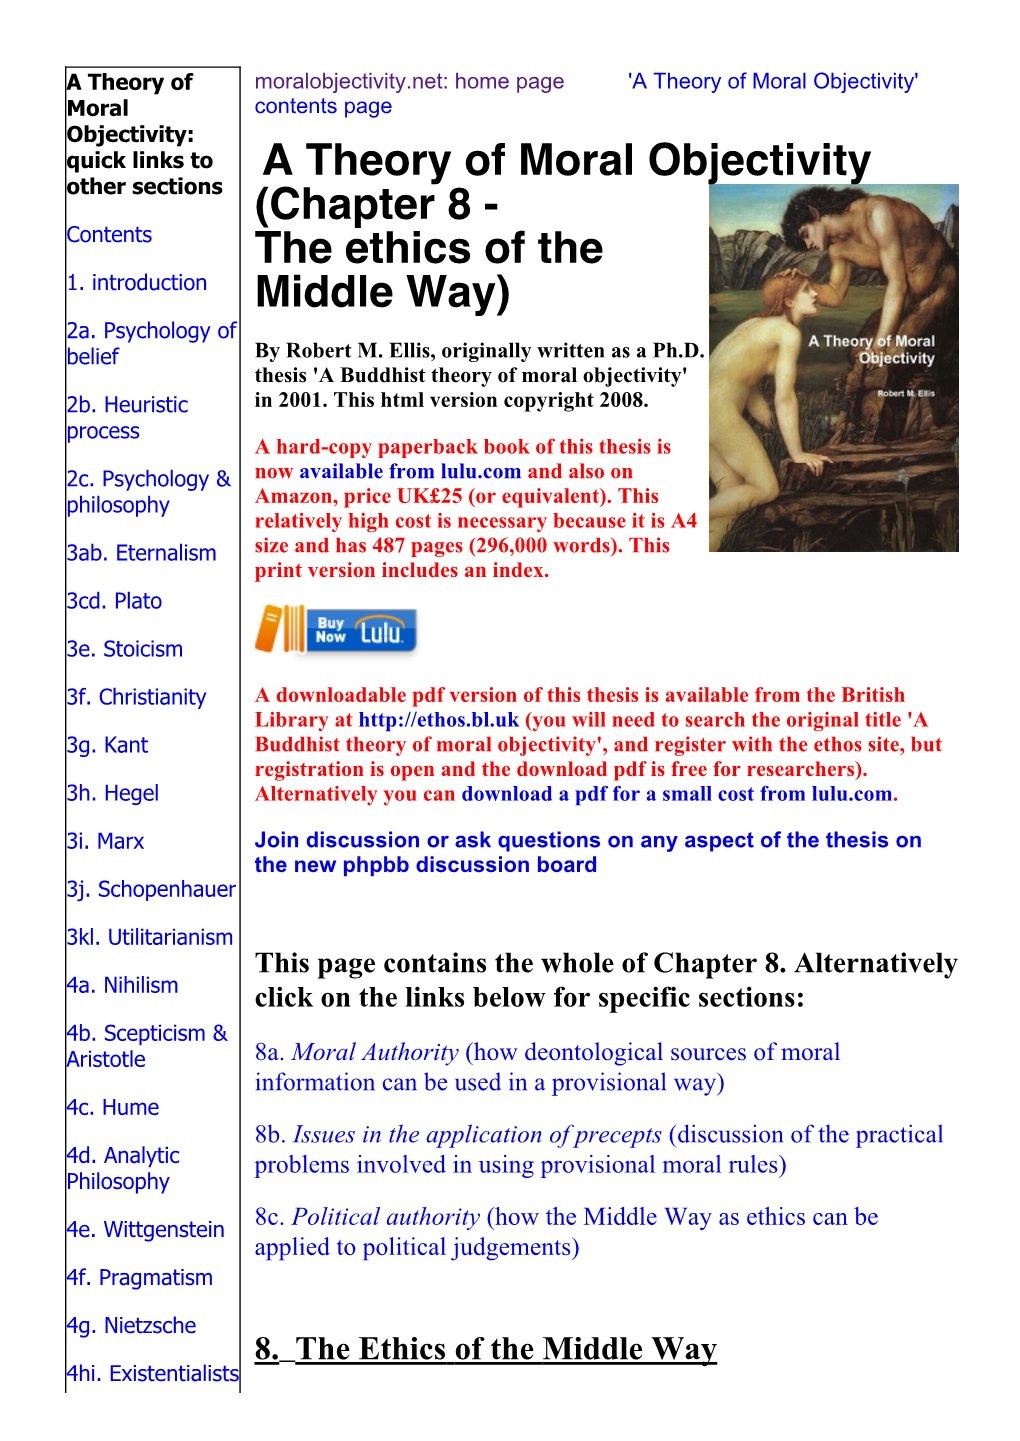 A Theory of Moral Objectivity' Moral Contents Page Objectivity: Quick Links to a Theory of Moral Objectivity Other Sections (Chapter 8 - Contents the Ethics of the 1